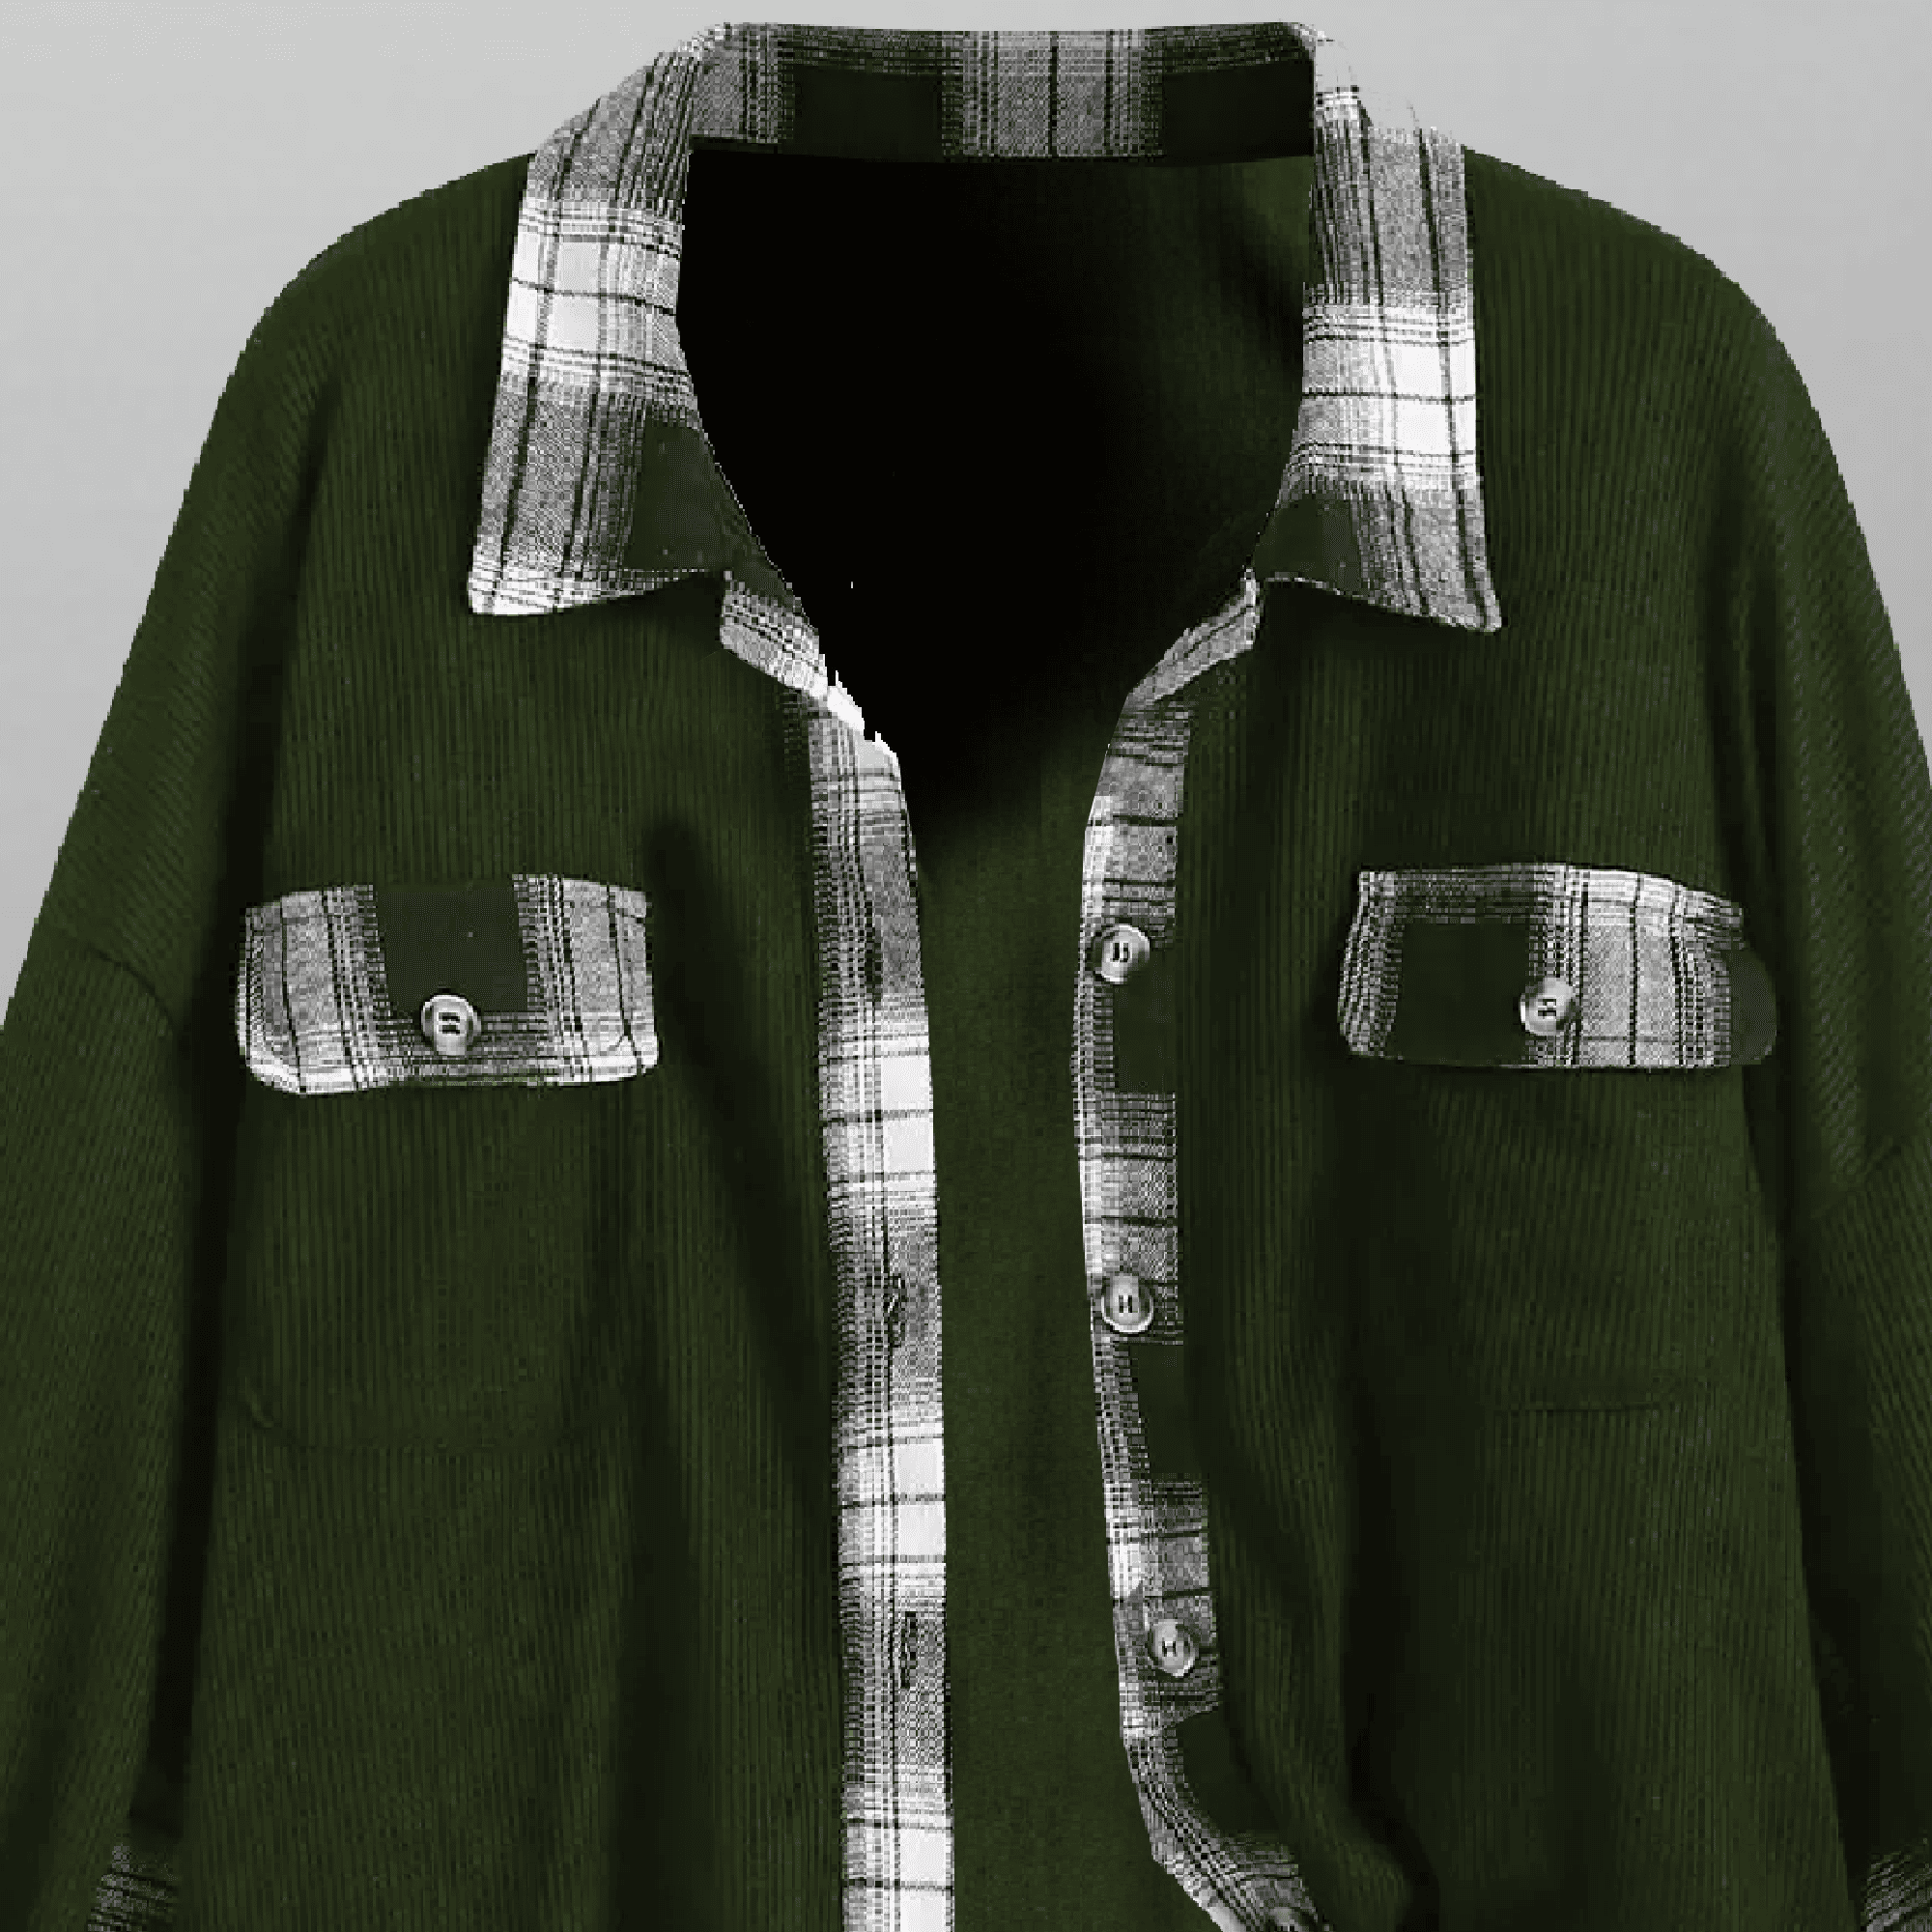 Men's Solid Green Corduroy oversized shirt with checks patches-RMS019